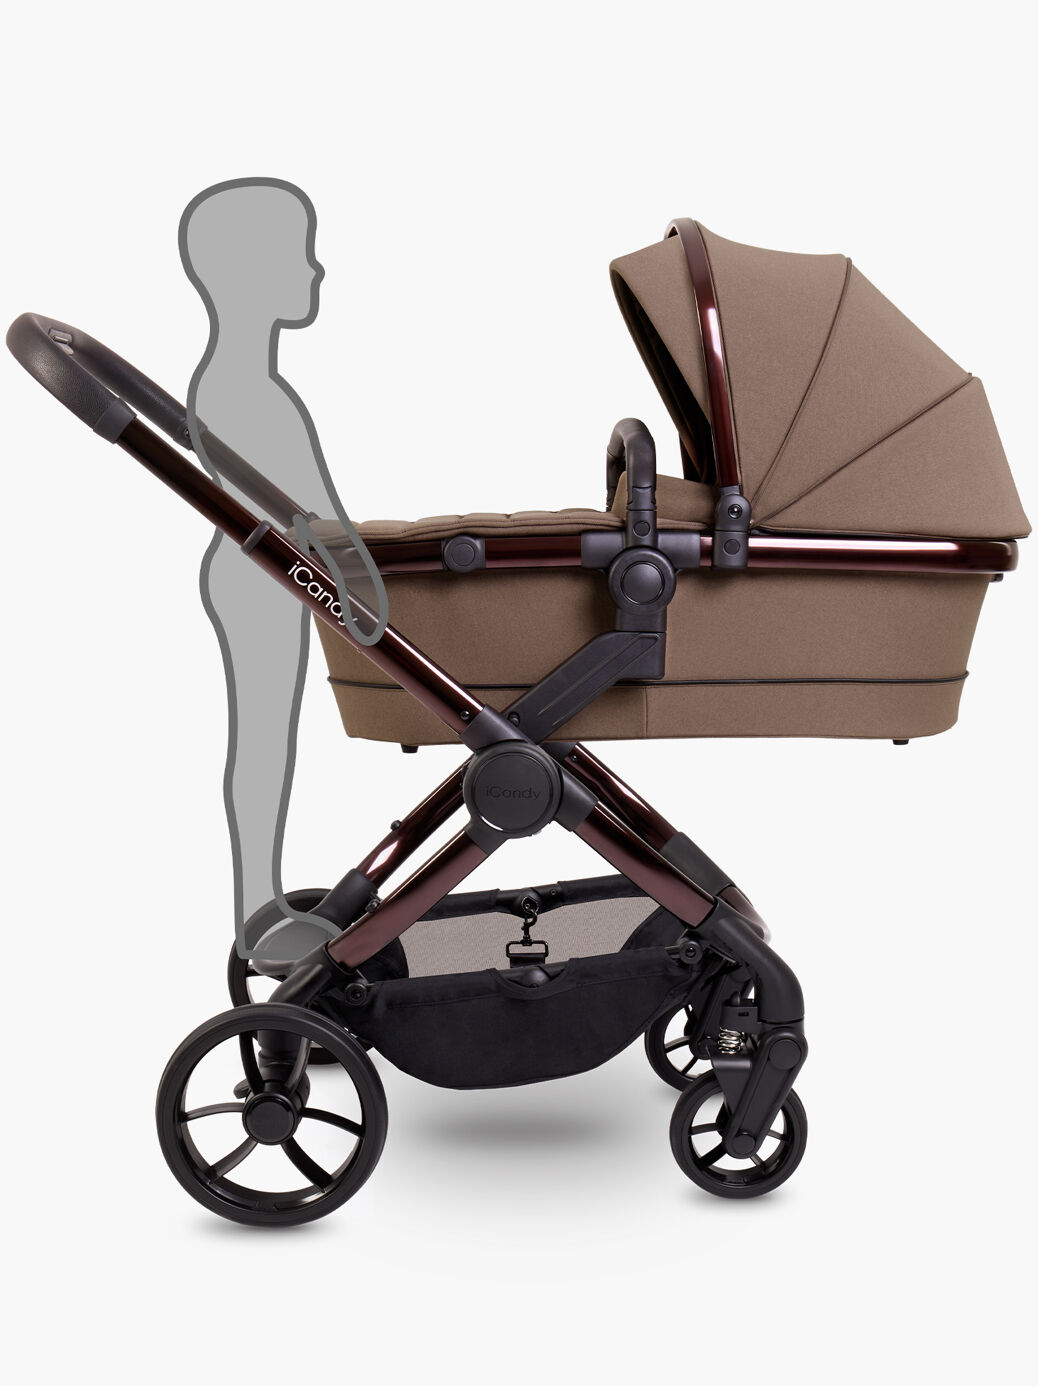 iCandy Peach 7 Pushchair and Carrycot Complete Car Seat Bundle | Coco